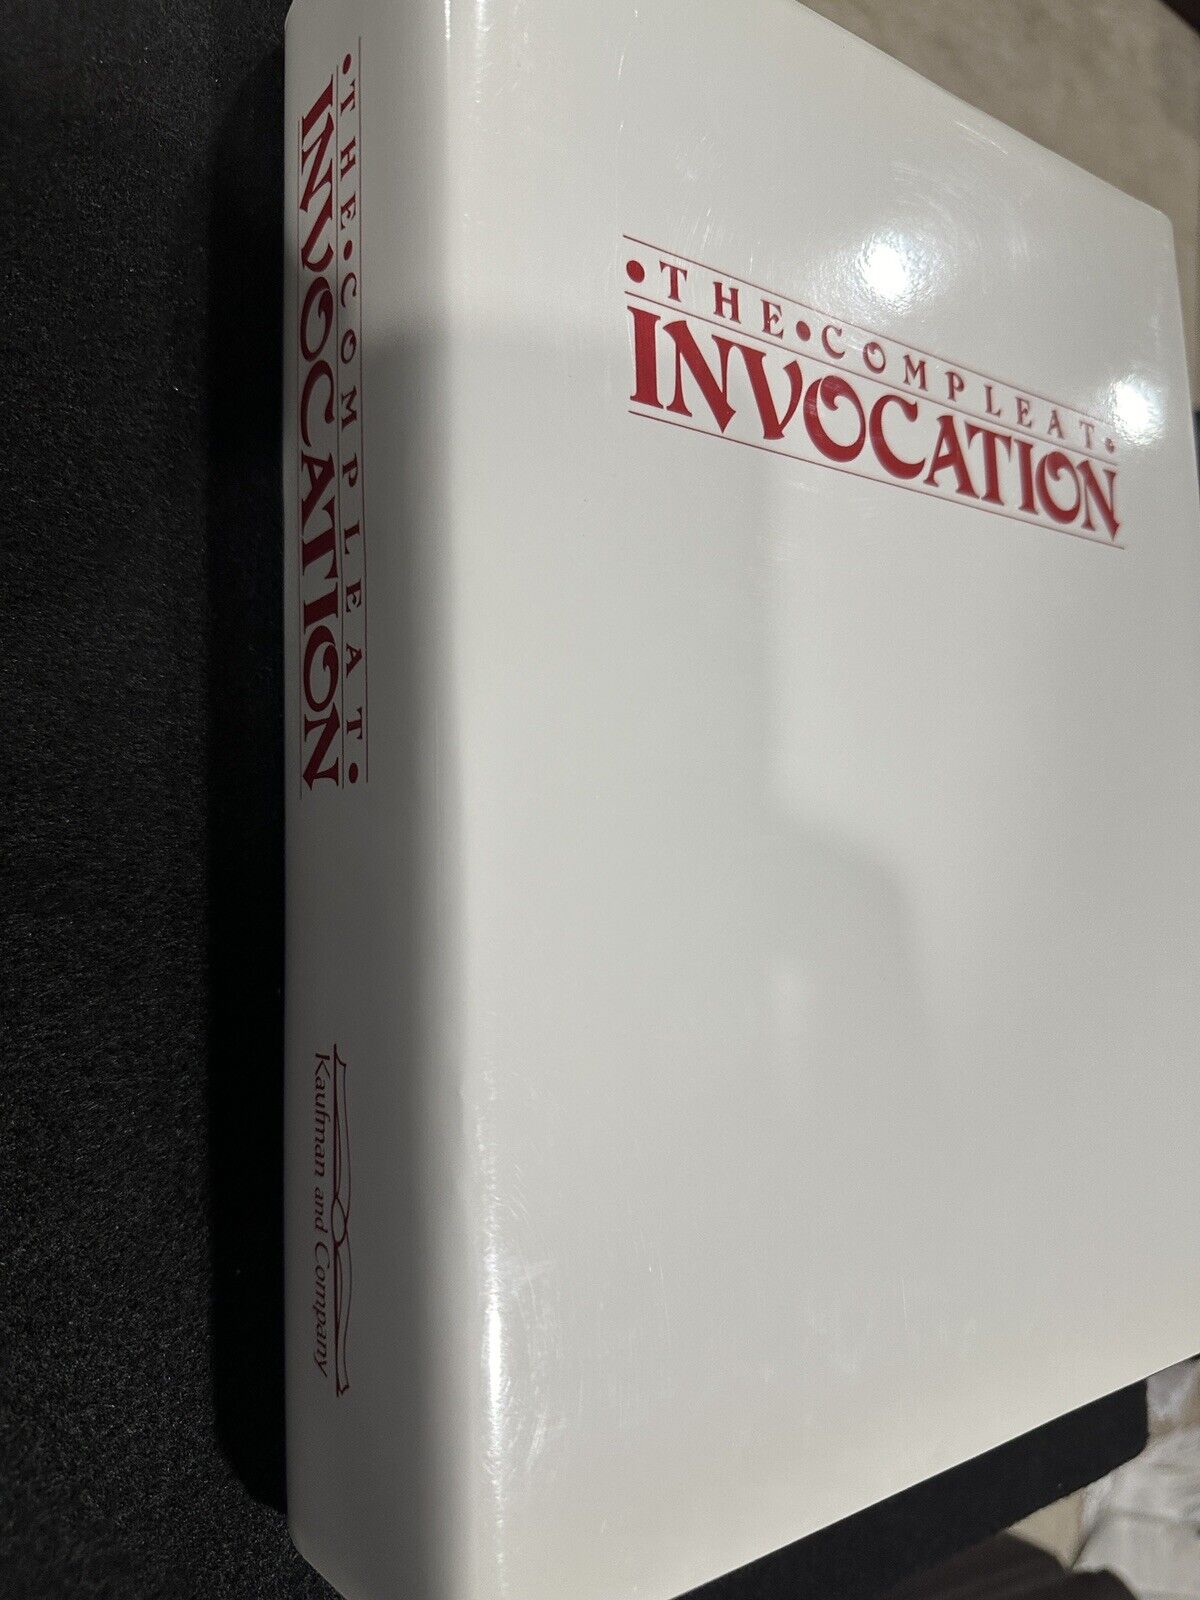 THE COMPLETE INVOCATION-New & Very Rare Out Of Print Magic Book . Buy Now